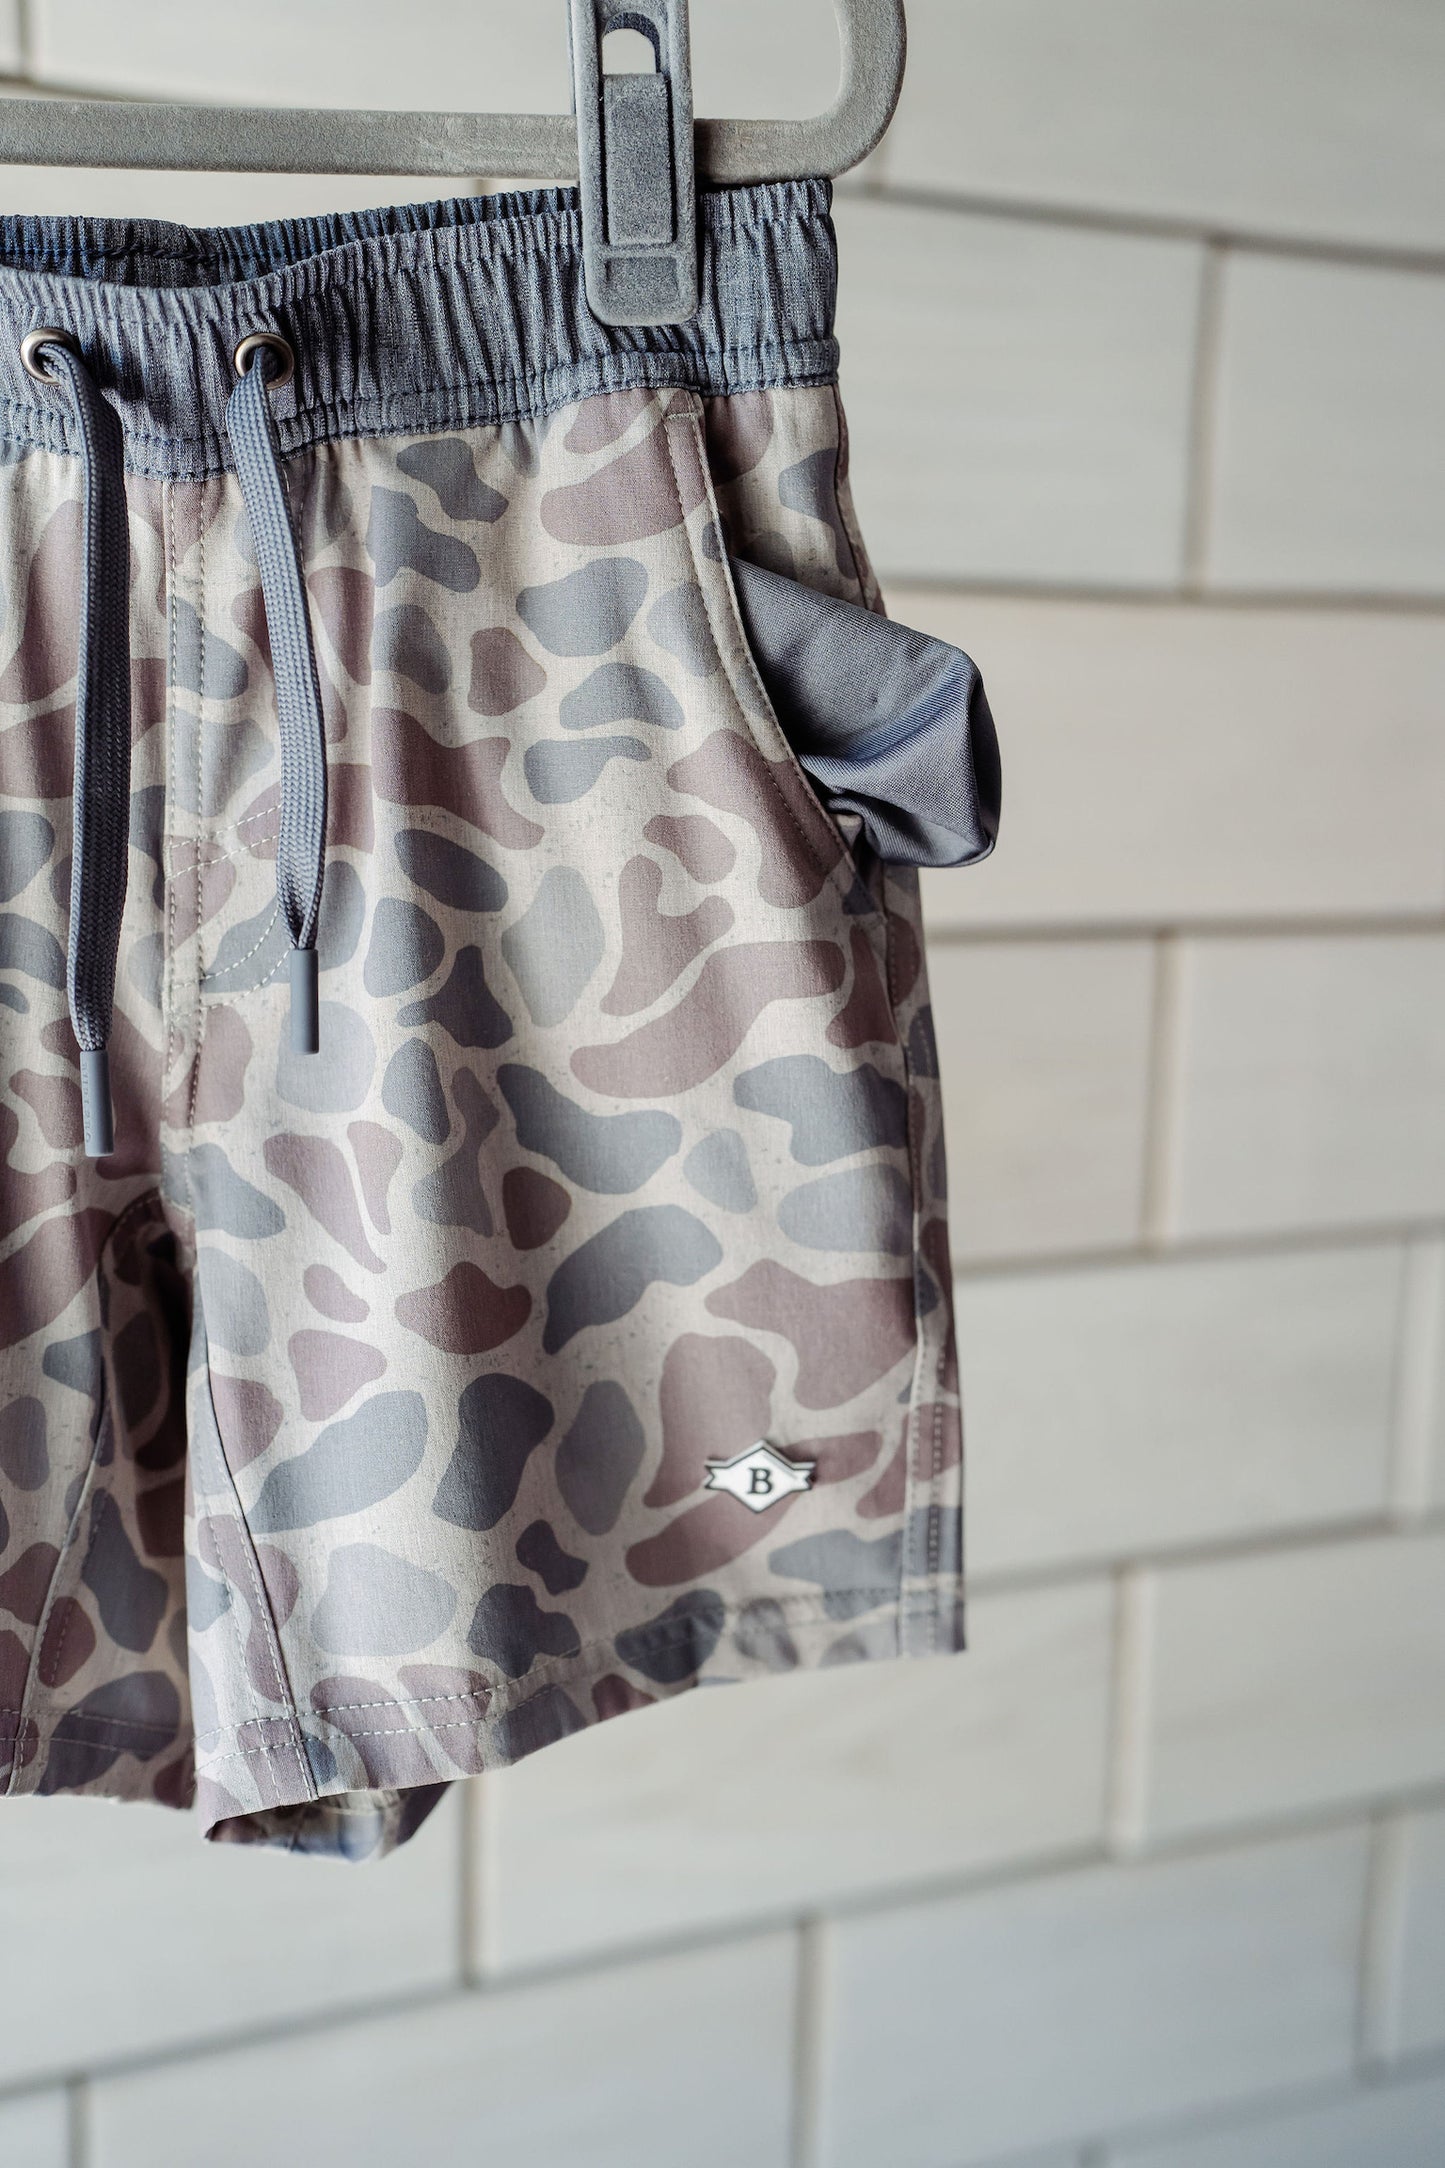 Toddler Burlebo Athletic Shorts - Classic Deer Camo